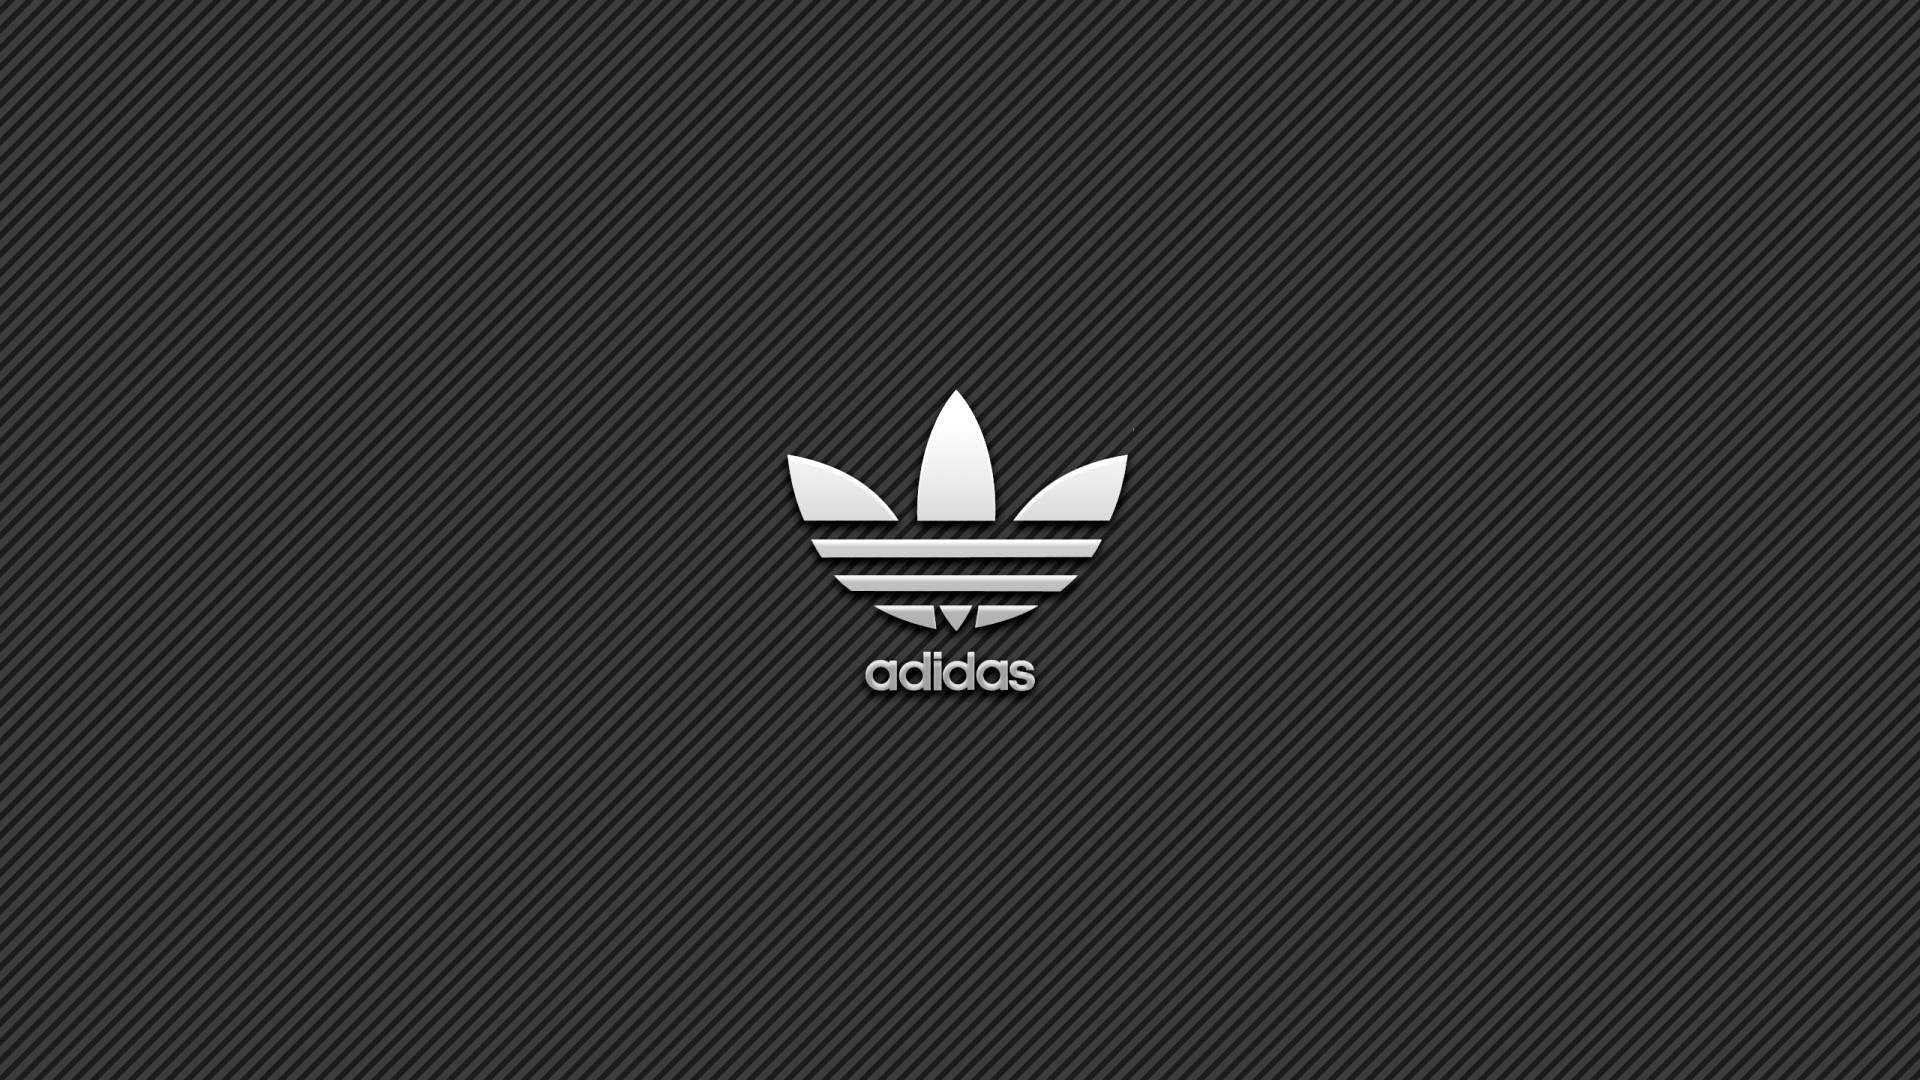 Adidas Facebook Cover Wallpapers